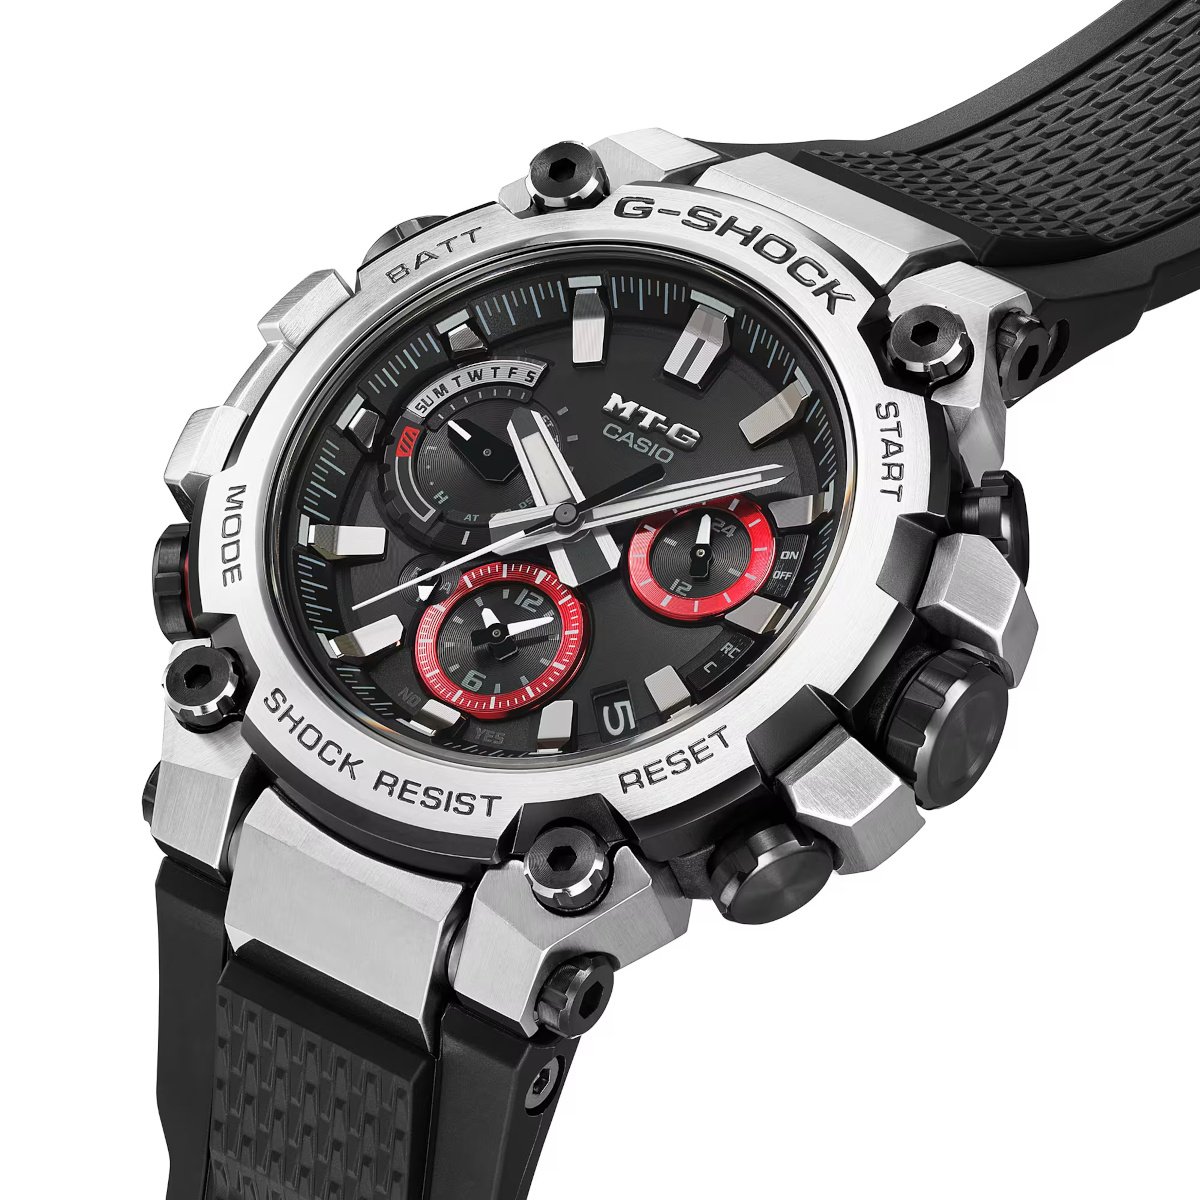 G-Shock MTG-B3000-1A: Silver stainless steel with black resin band